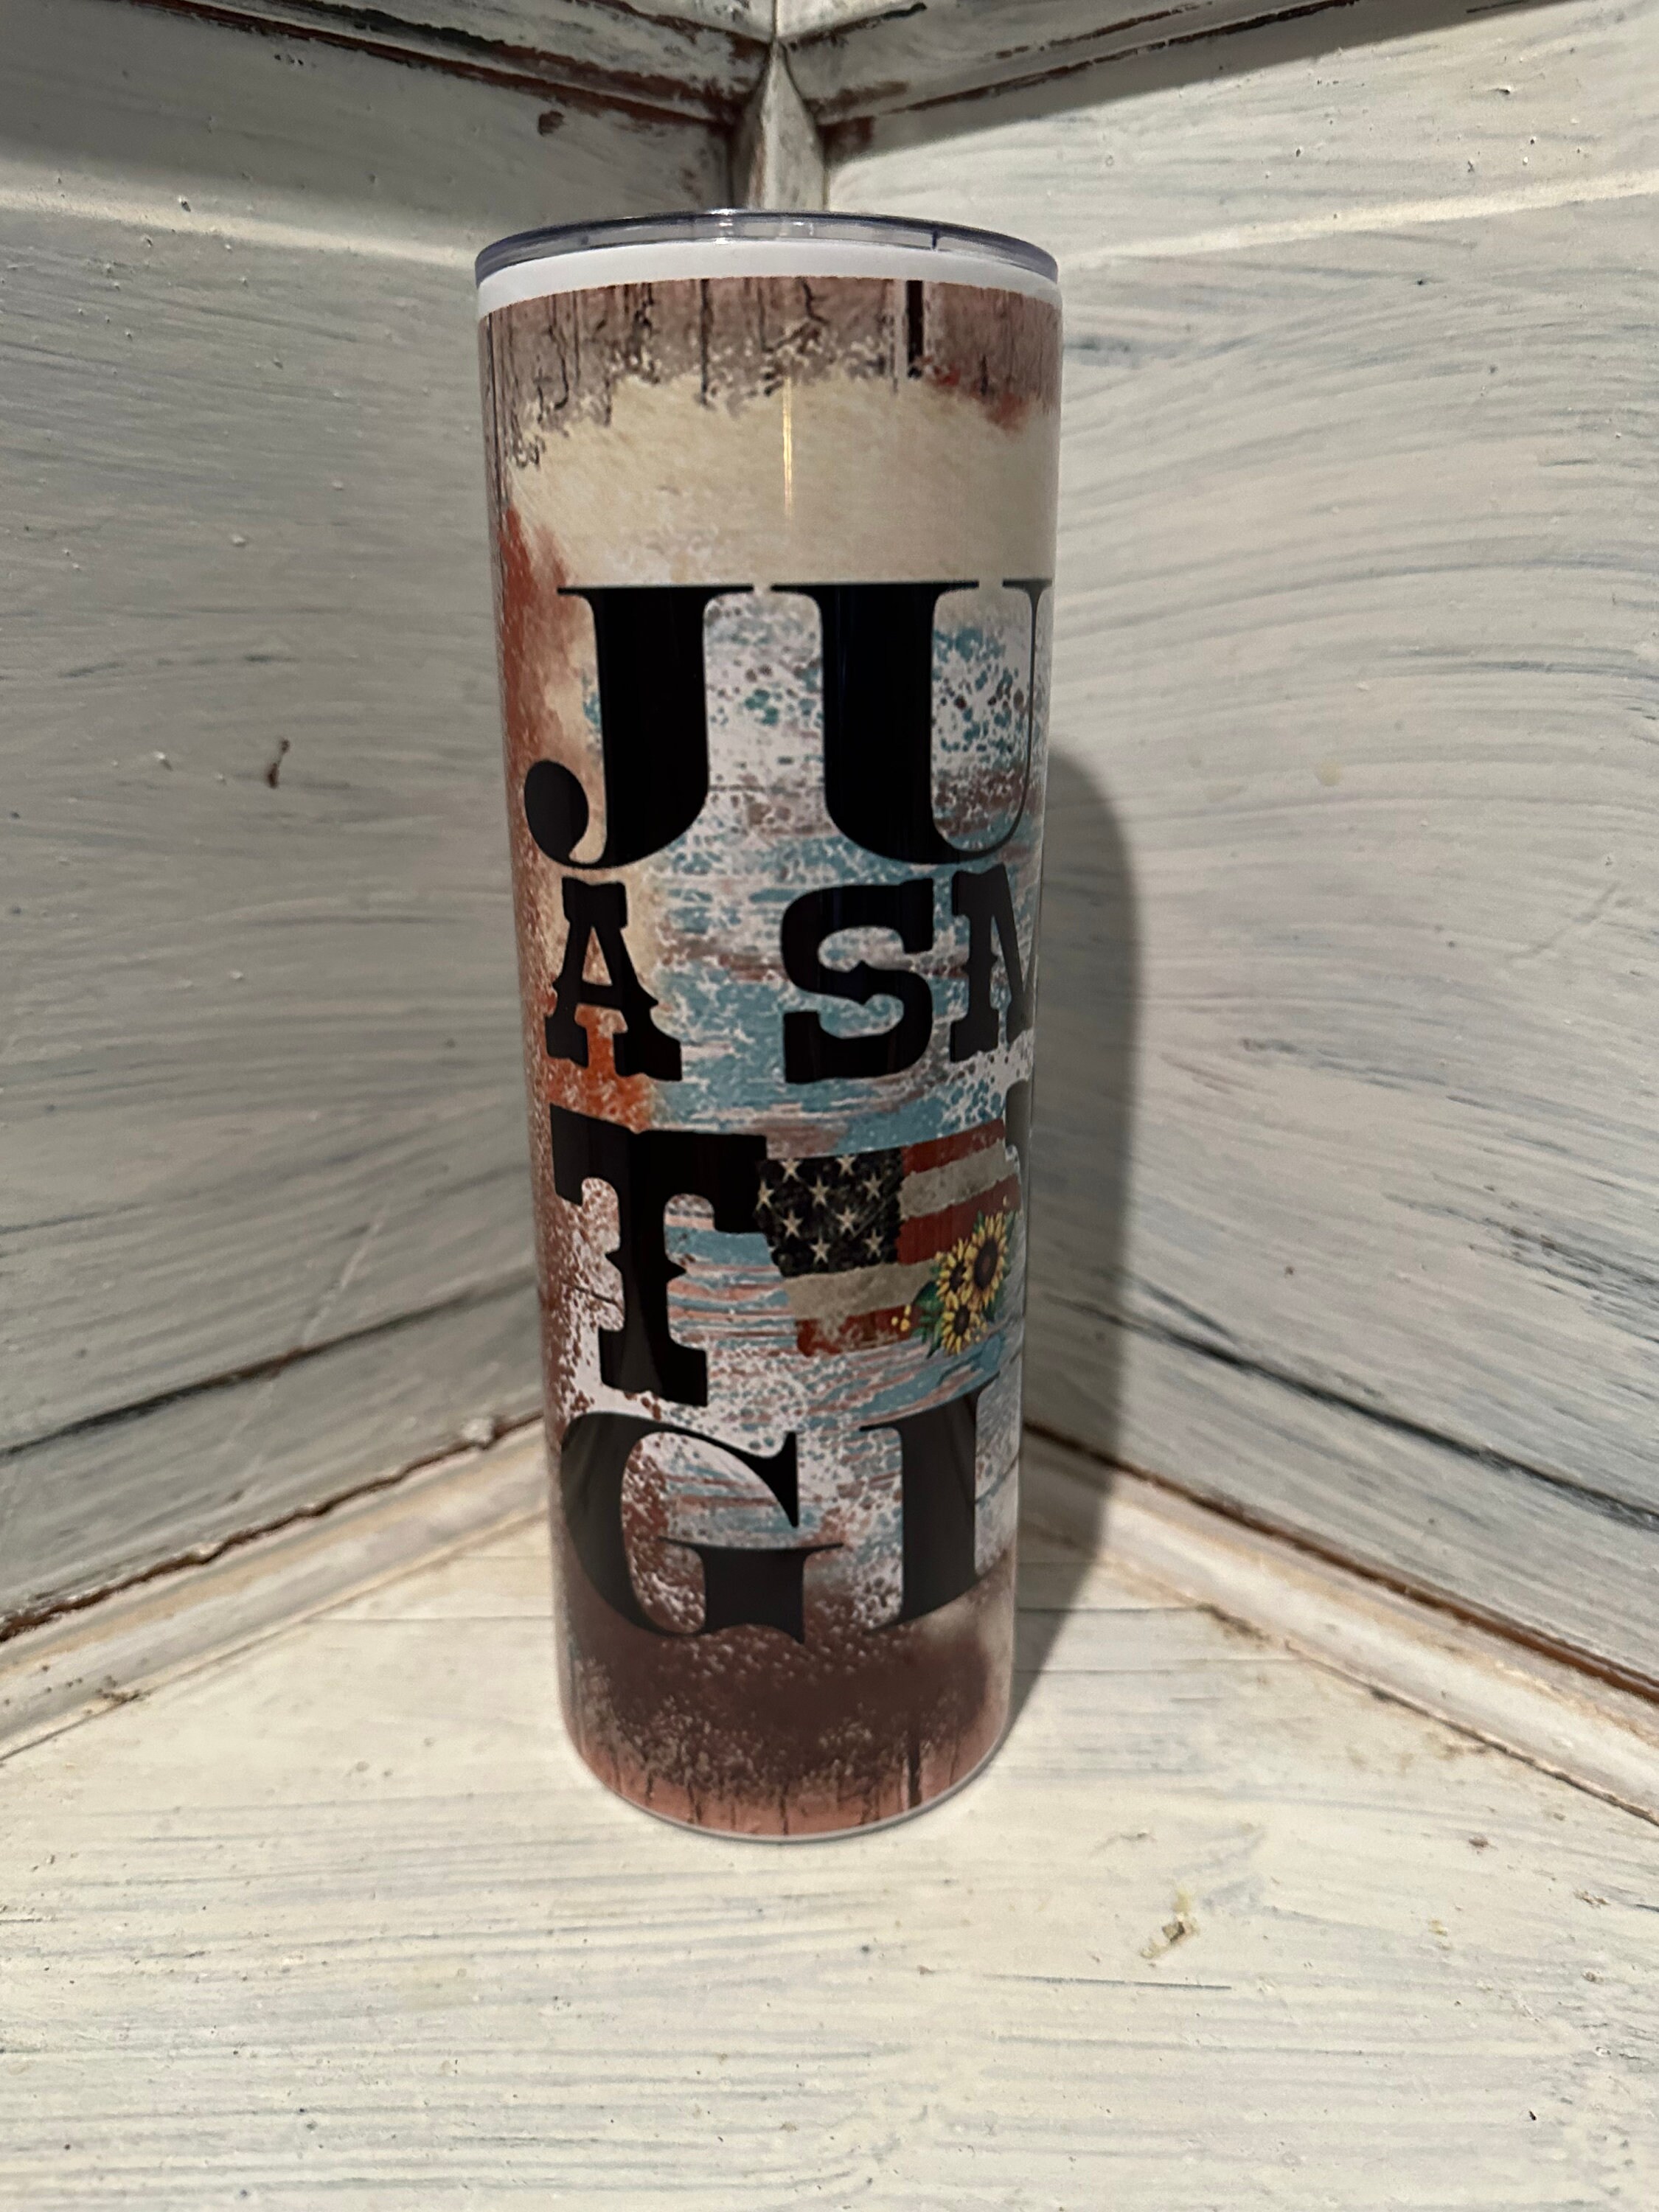 Just A Small Town Girl Travel Tumbler in Coral – The Montana Way